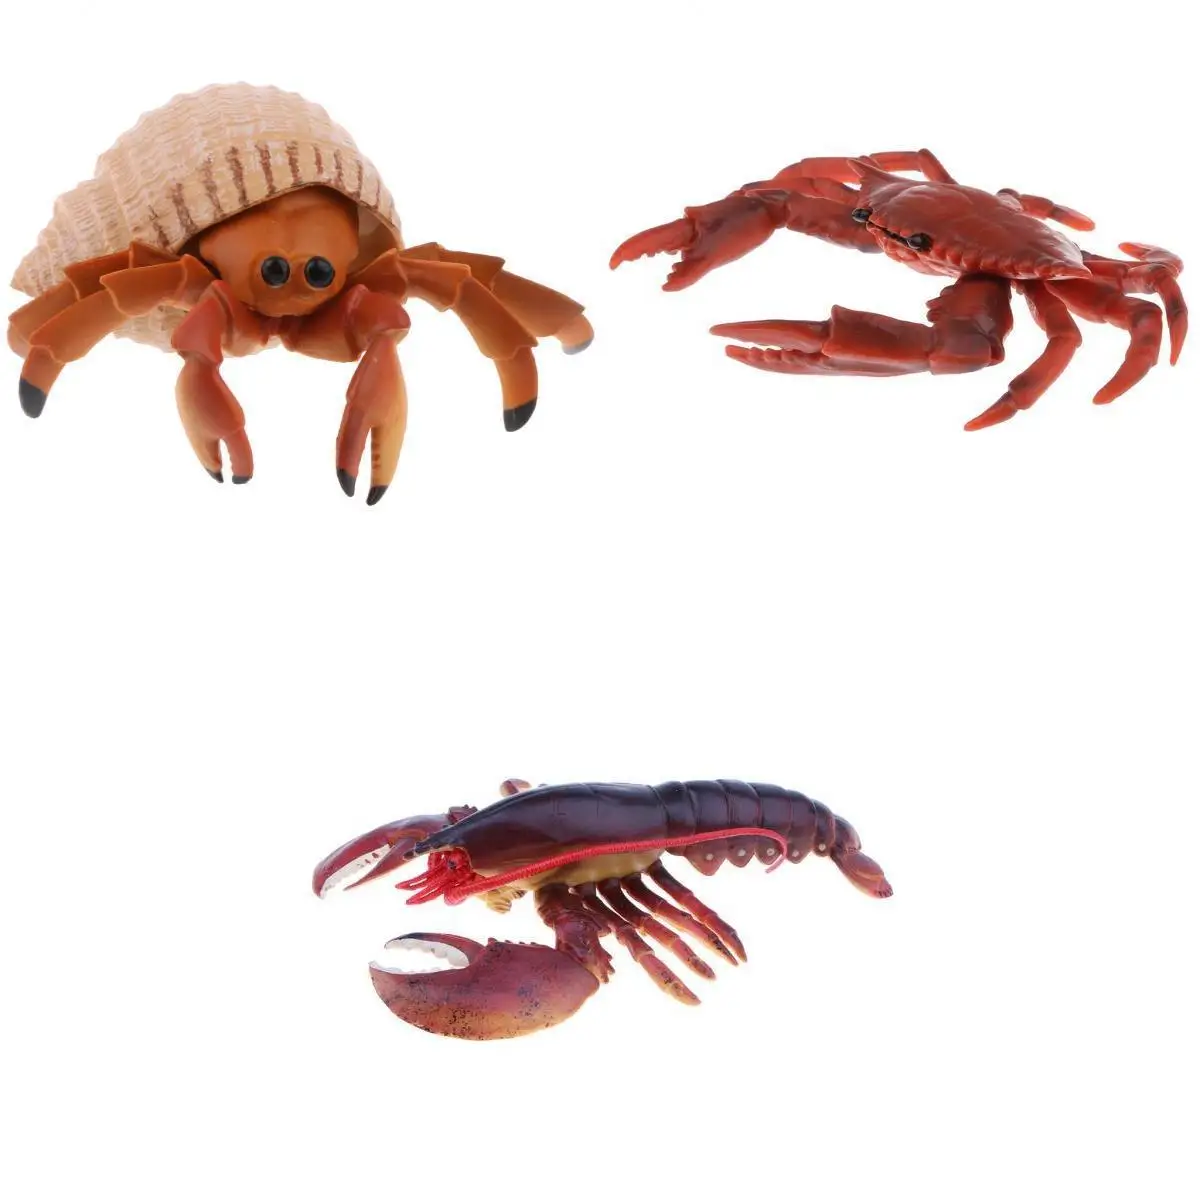 3pcs Fake Sea Life Creatures Collection Artificial Simulation Lobster &  Nautical Animal Display Kids Toy Party Favors